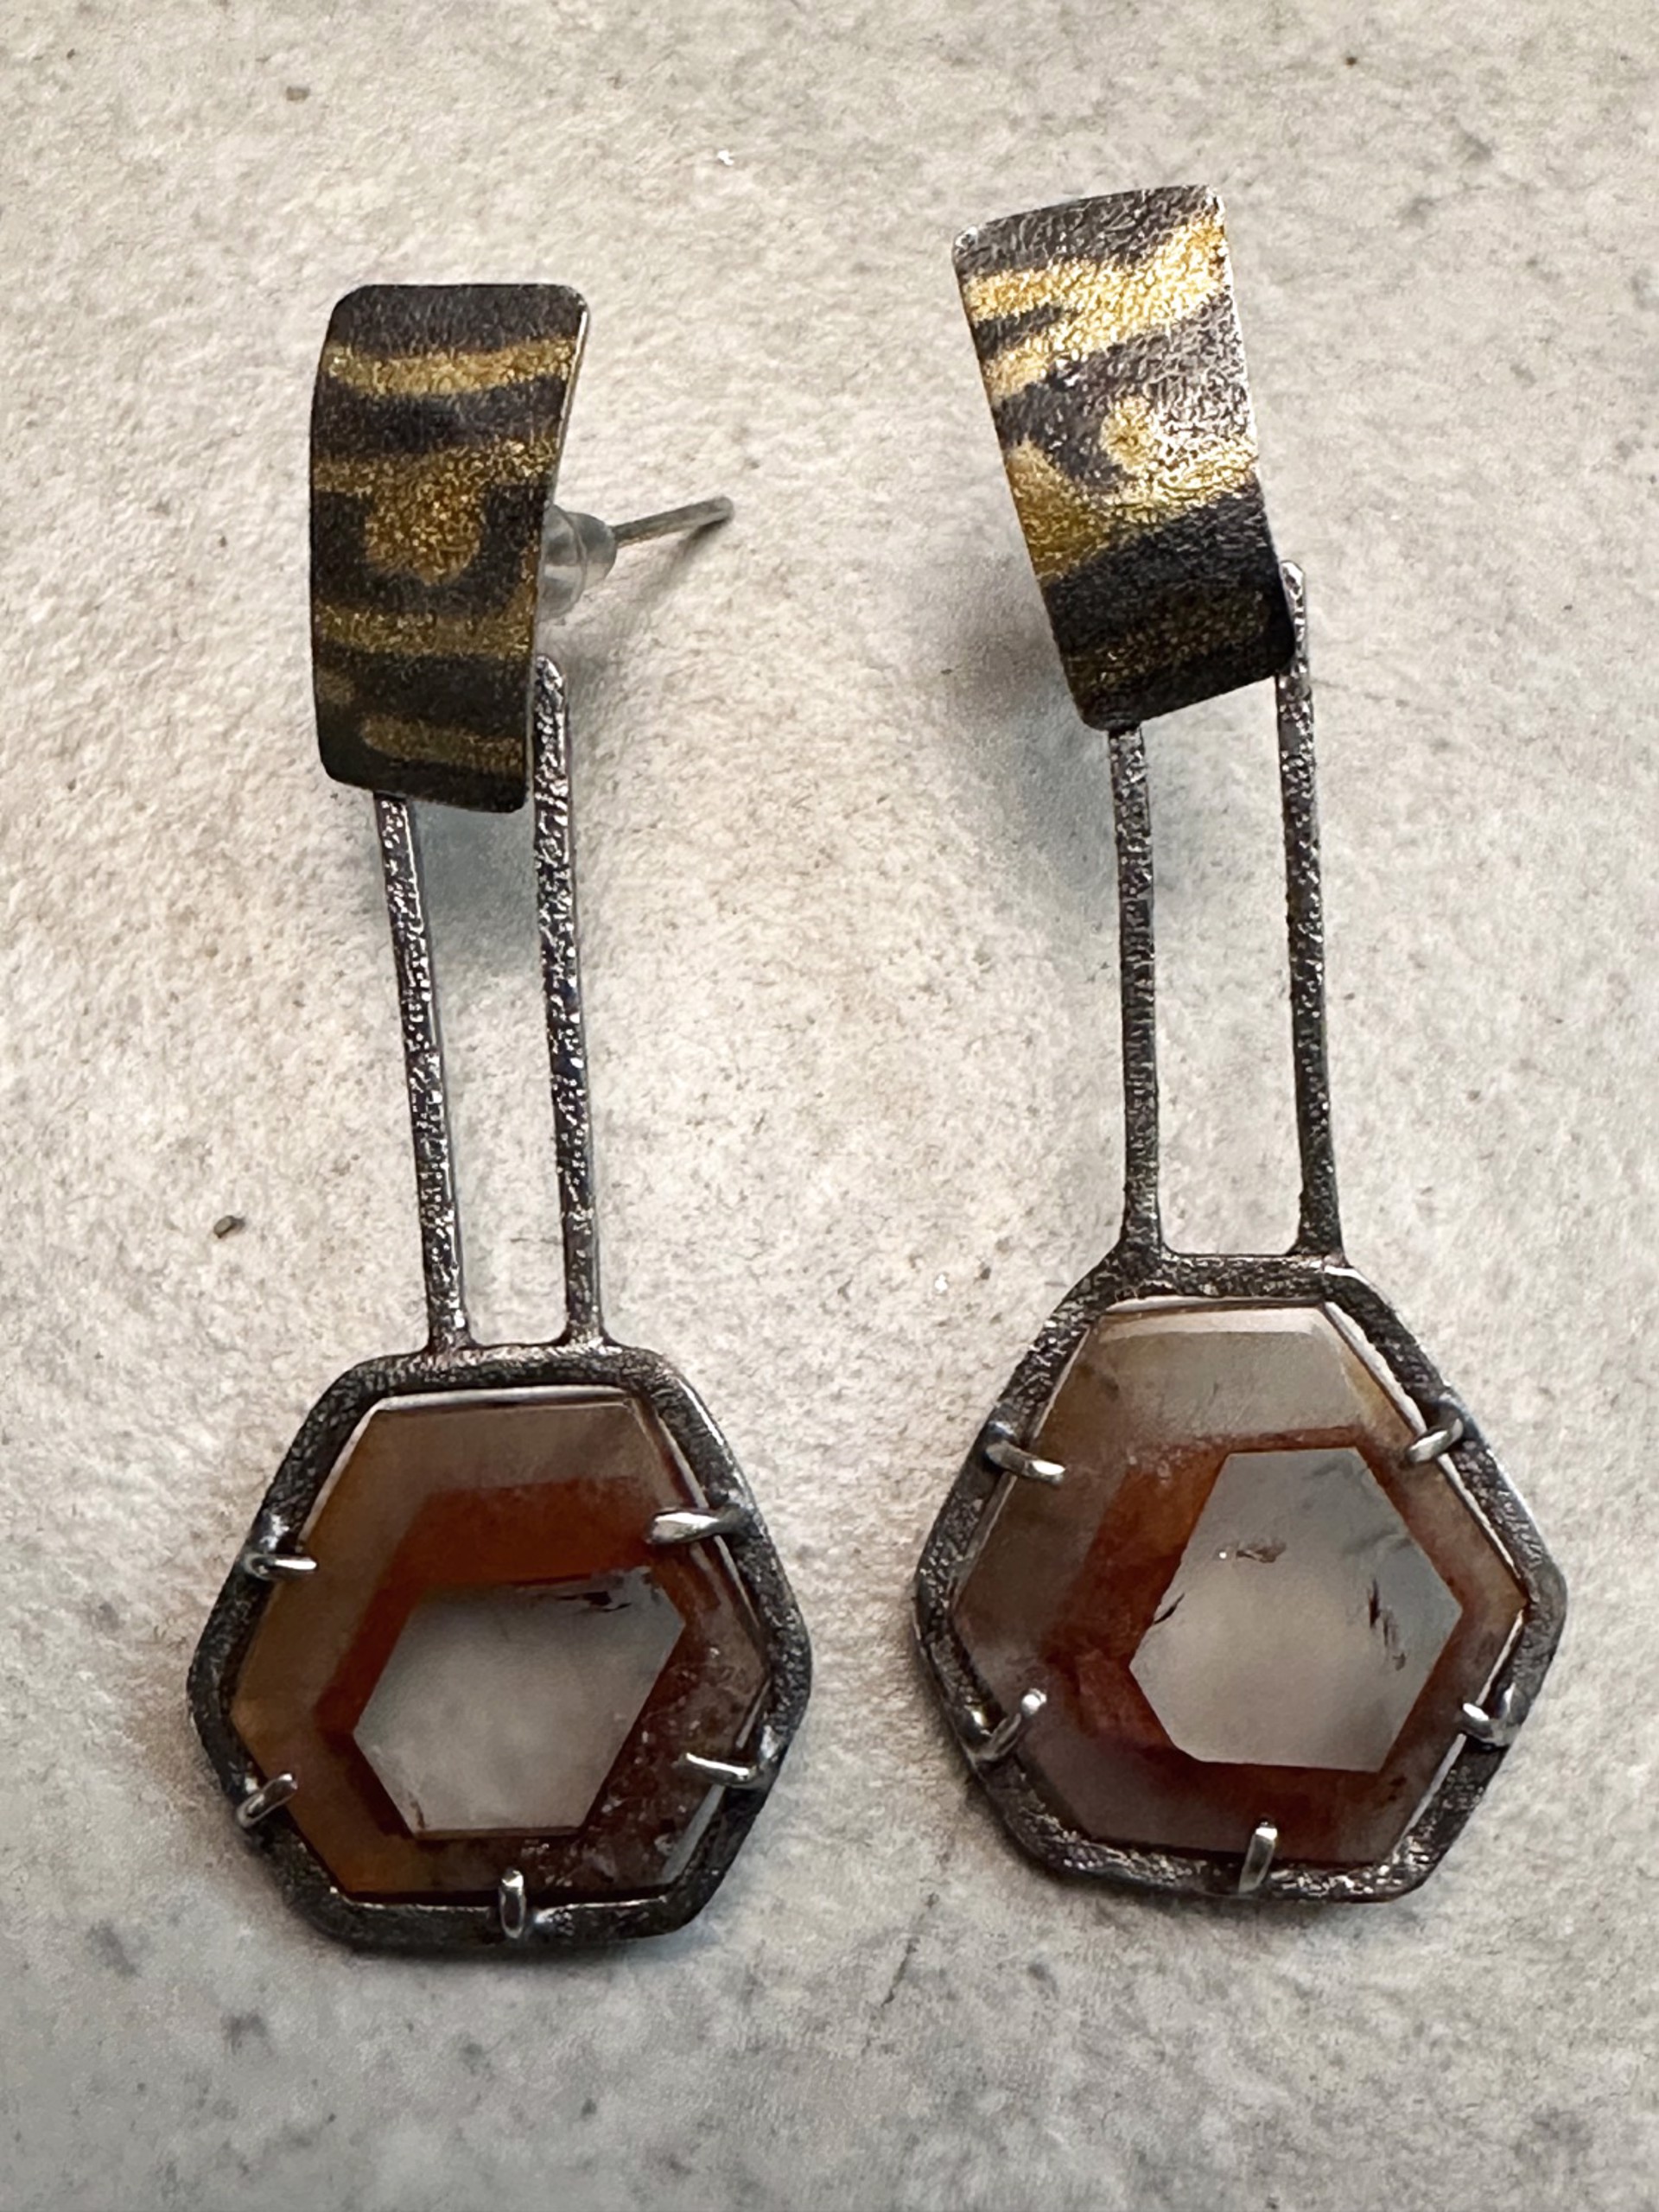 Earrings - Morrocan Red Quartz with 24 KT Gold Fusion Tribal Pattern AC 321 by Annette Campbell